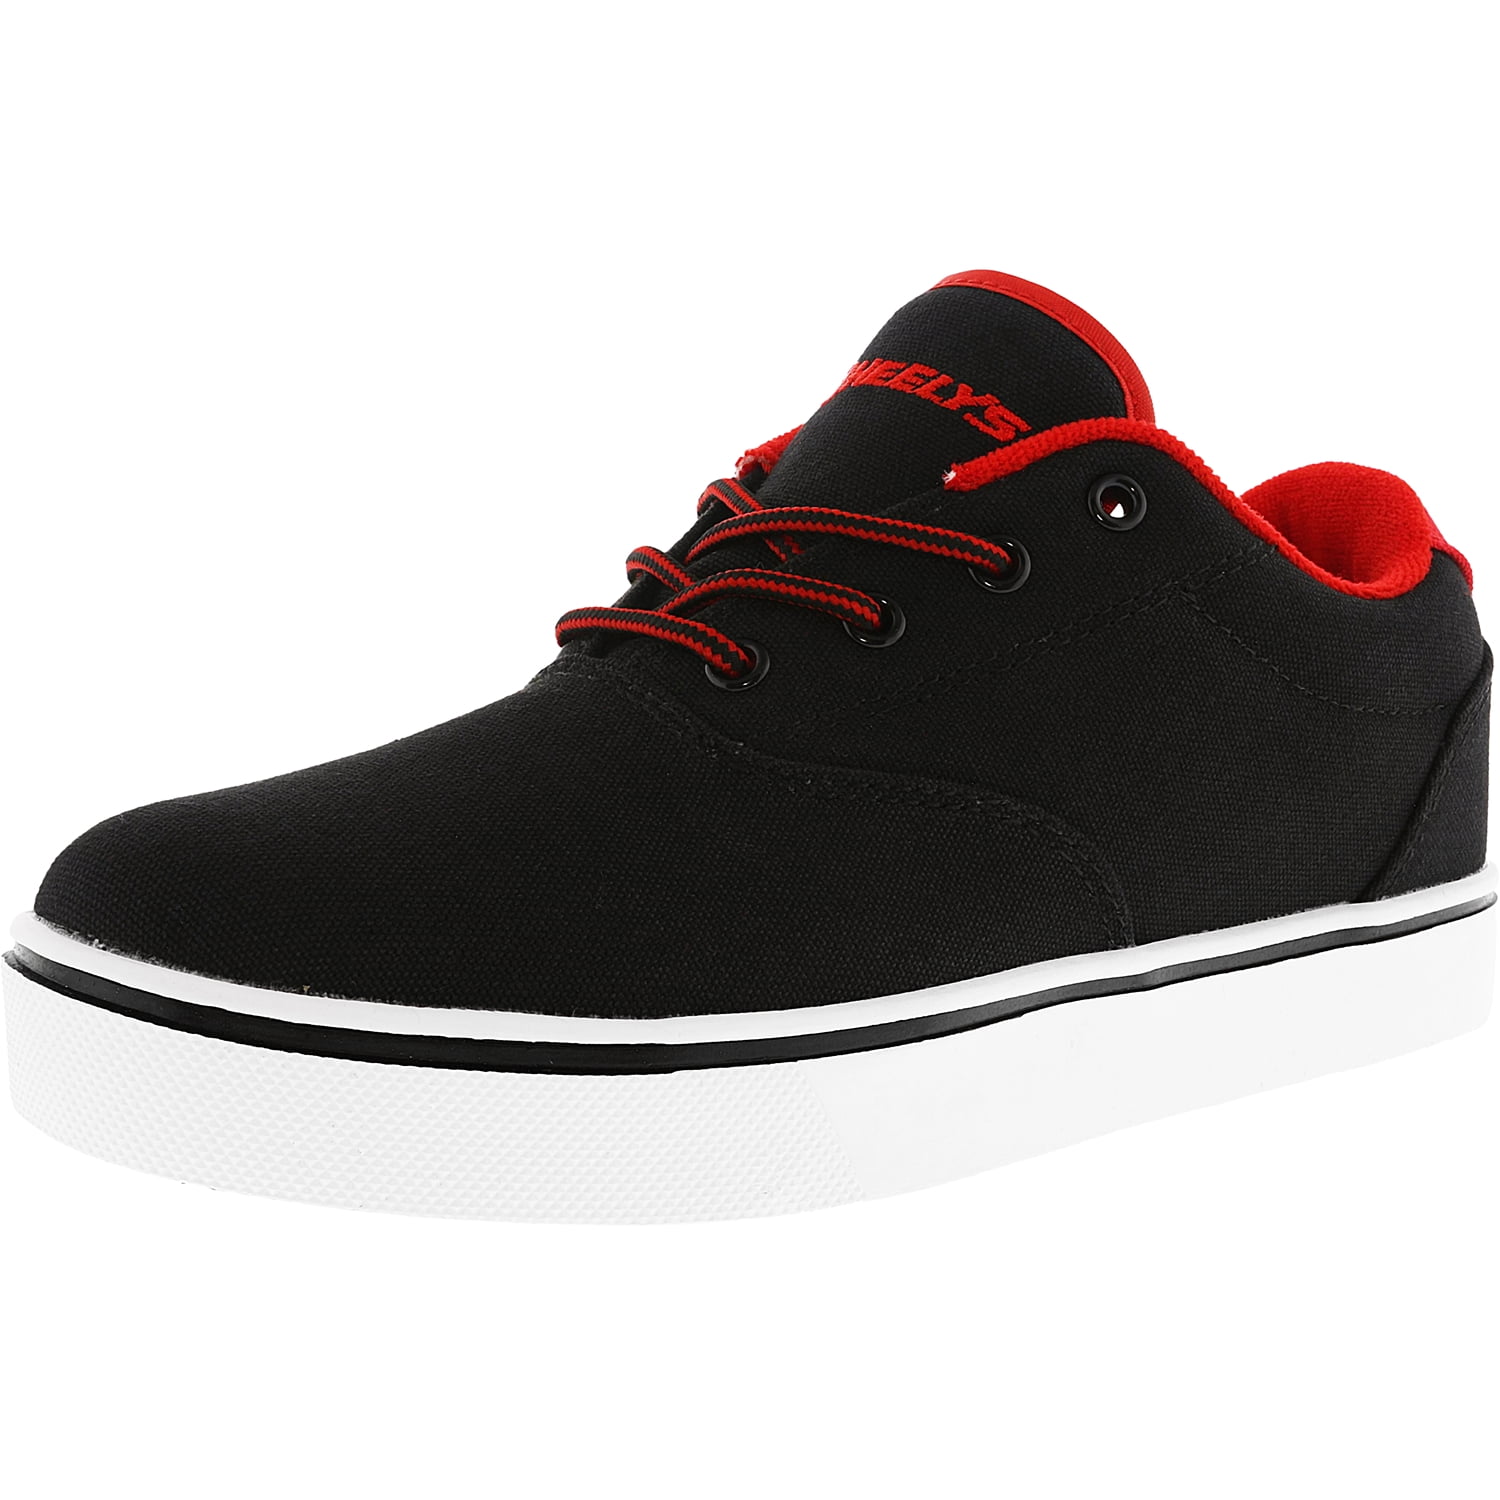 Red Ankle-High Fashion Sneaker - 3M 